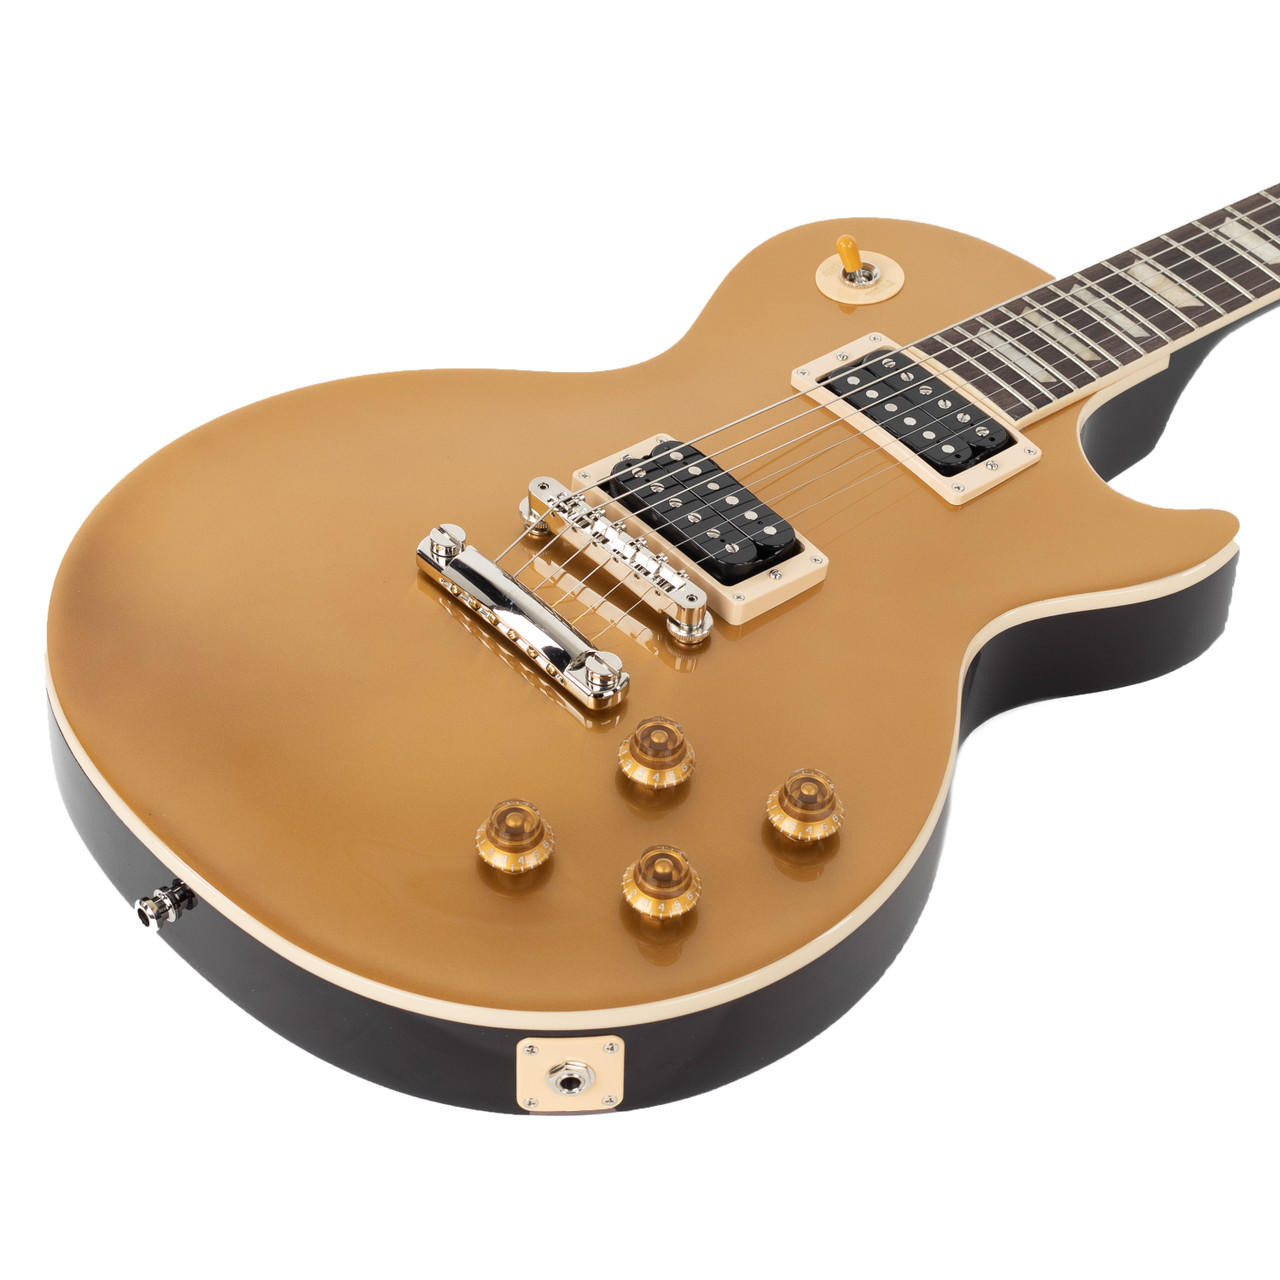 Slash names new Gibson Victoria guitar after person who stole